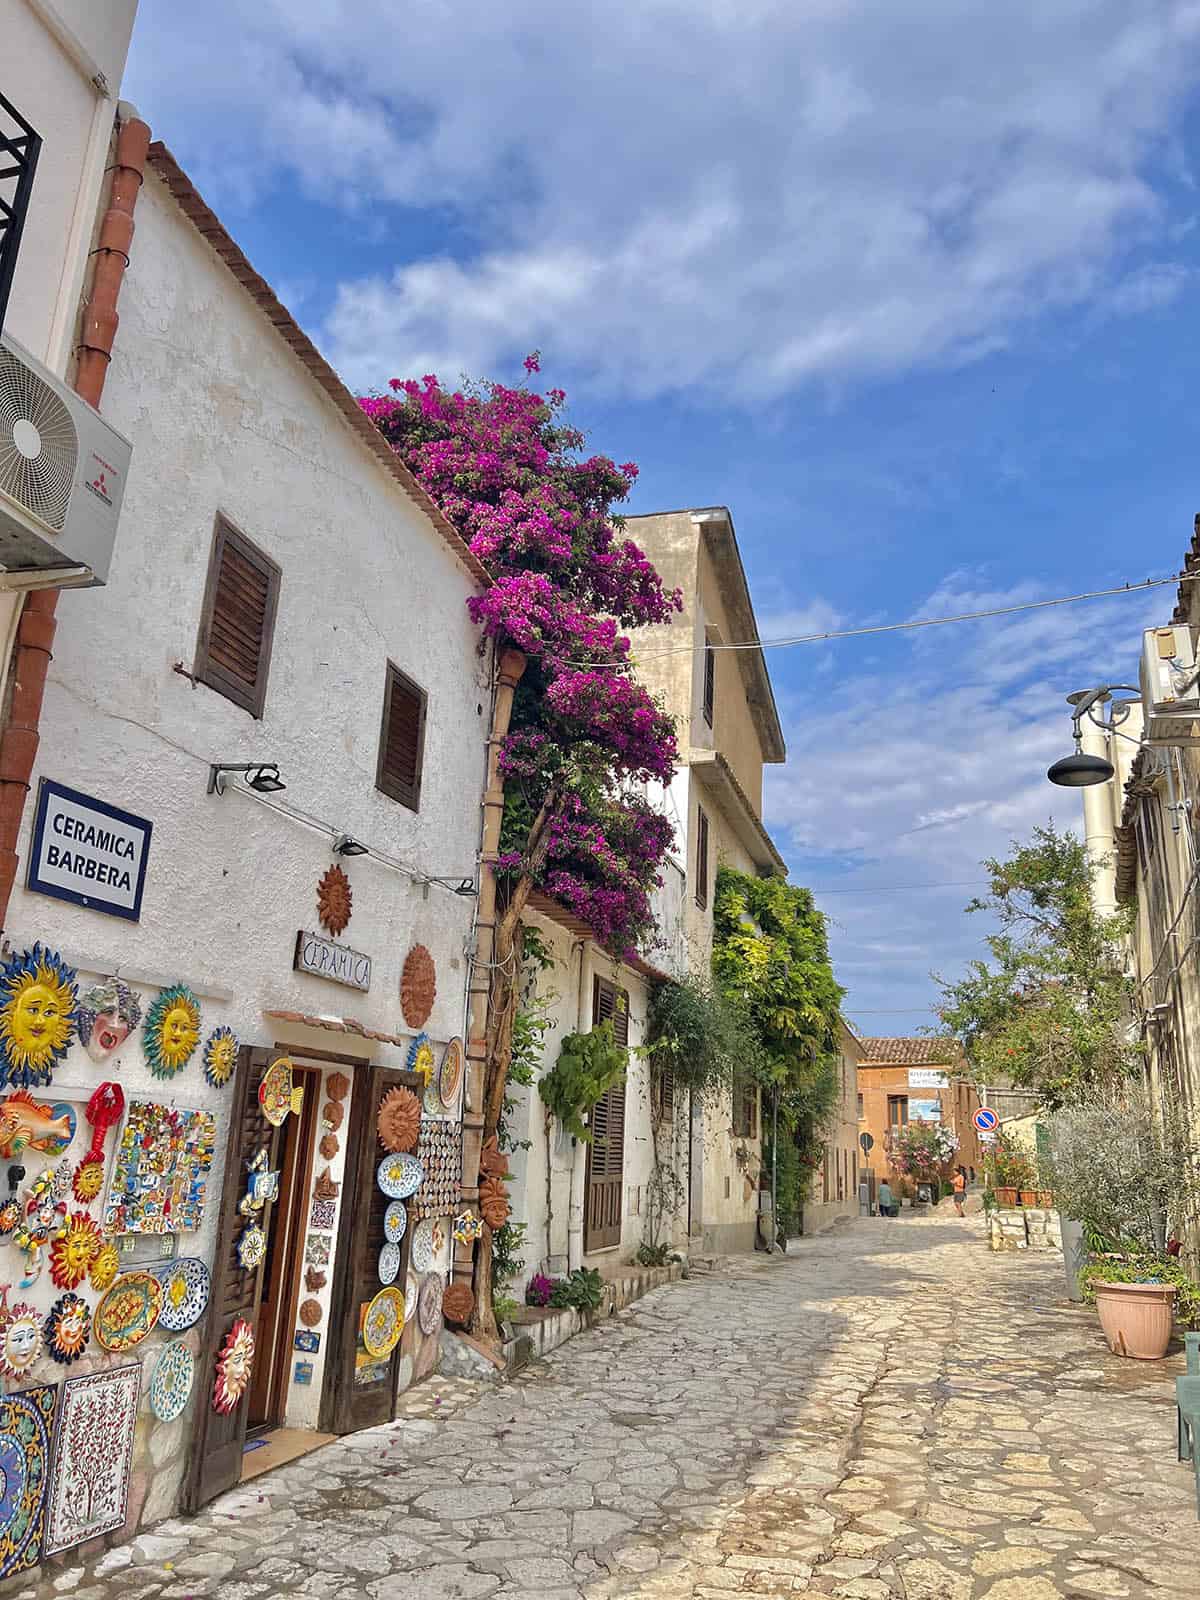 An image of the cobbled streets of Scopello, Sicily. In the foreground is a ceramic shop with a large bougainvillea tree on the balcony. The sky is blue and sunny